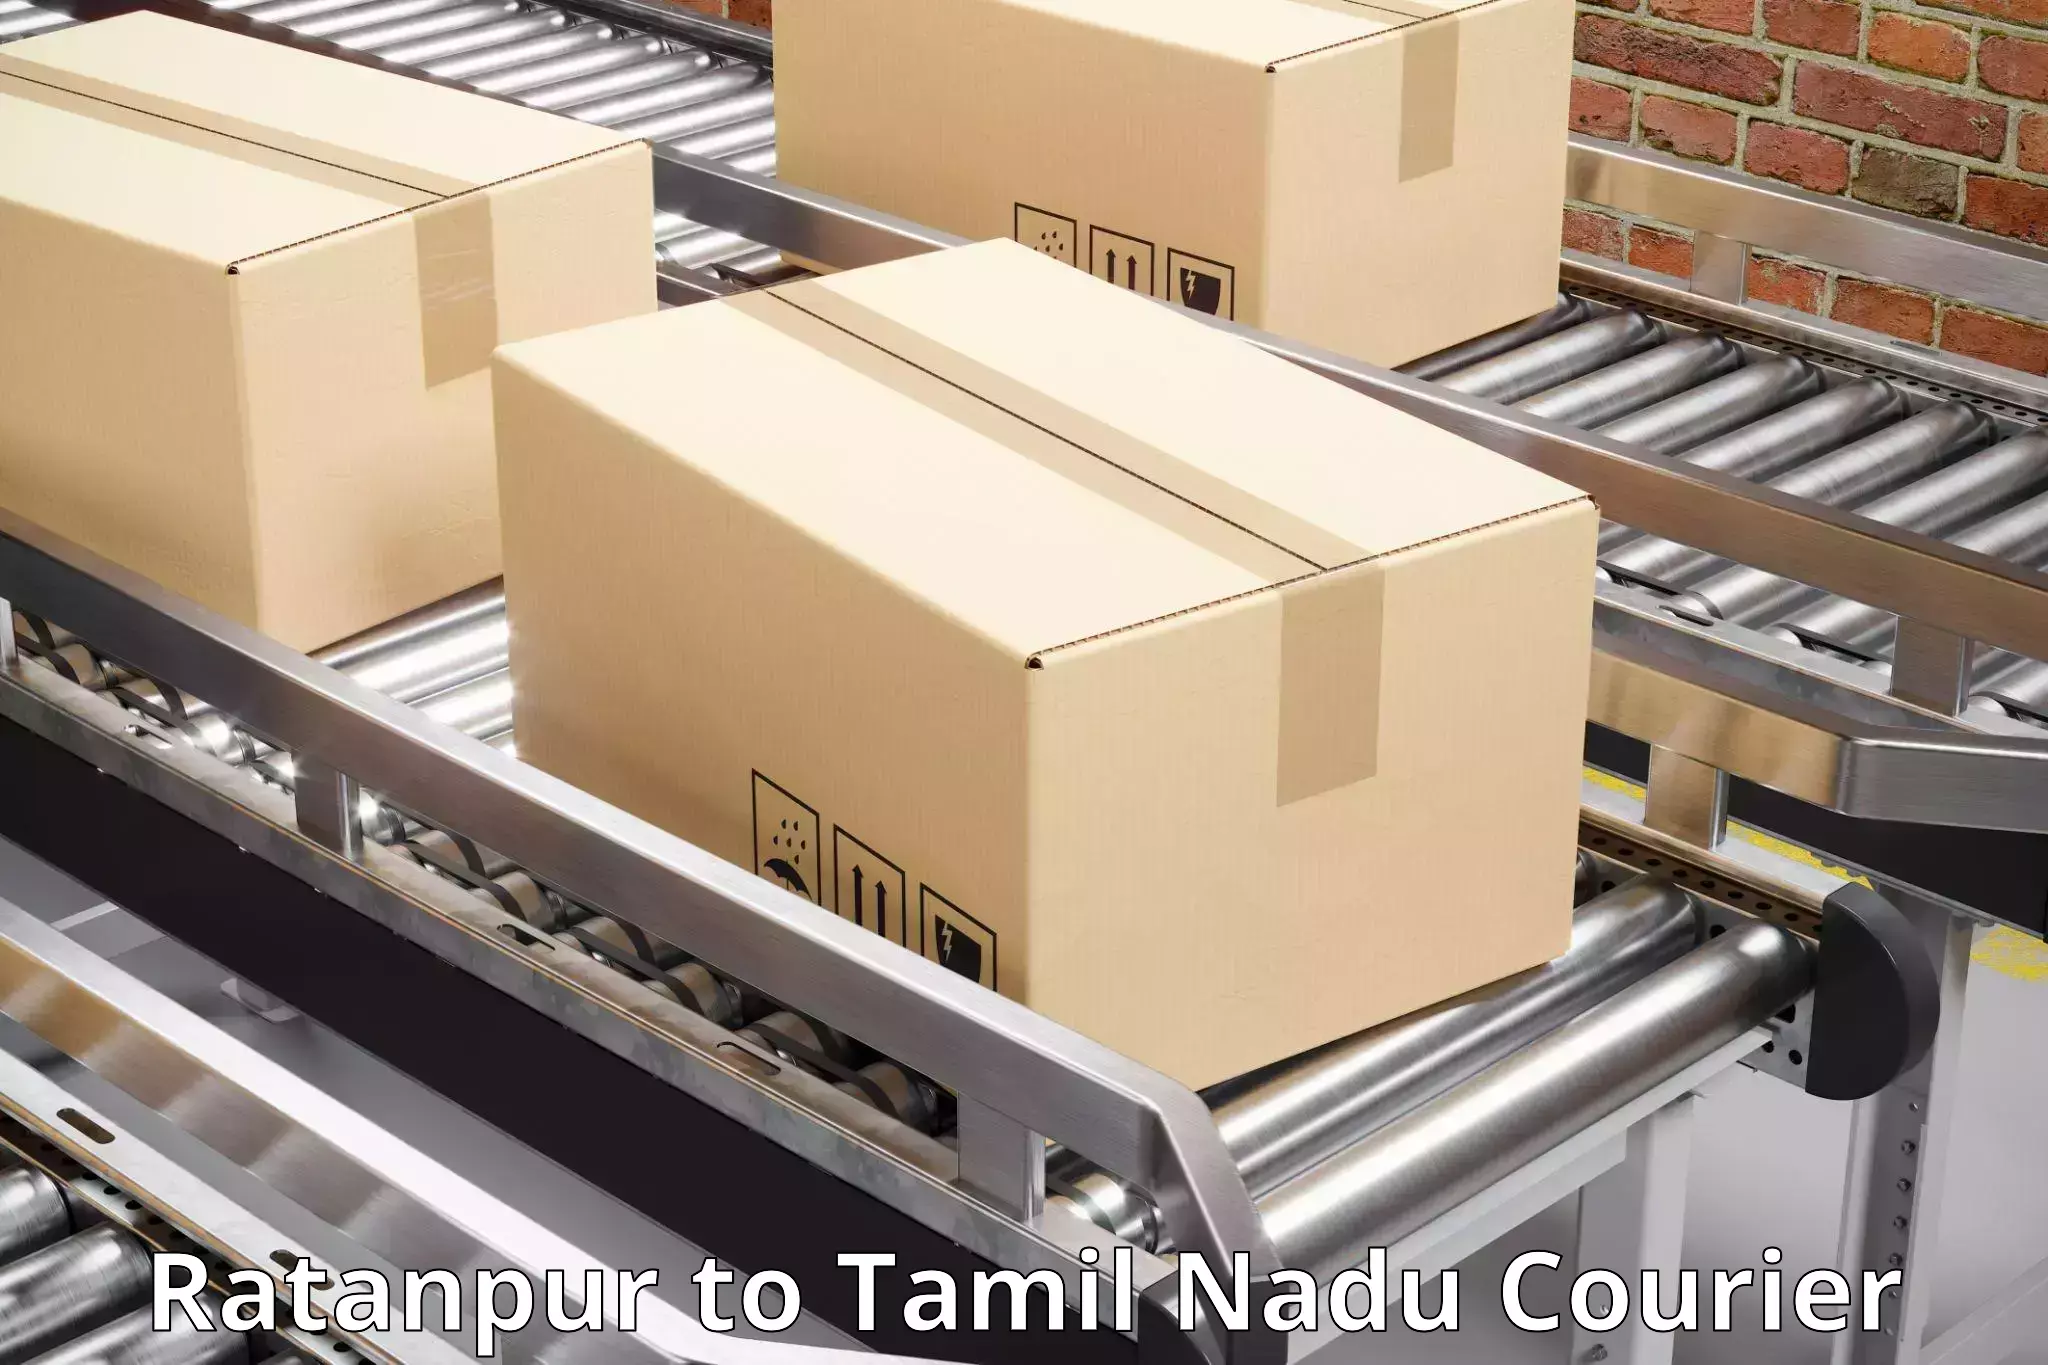 Quality courier partnerships Ratanpur to Tamil Nadu